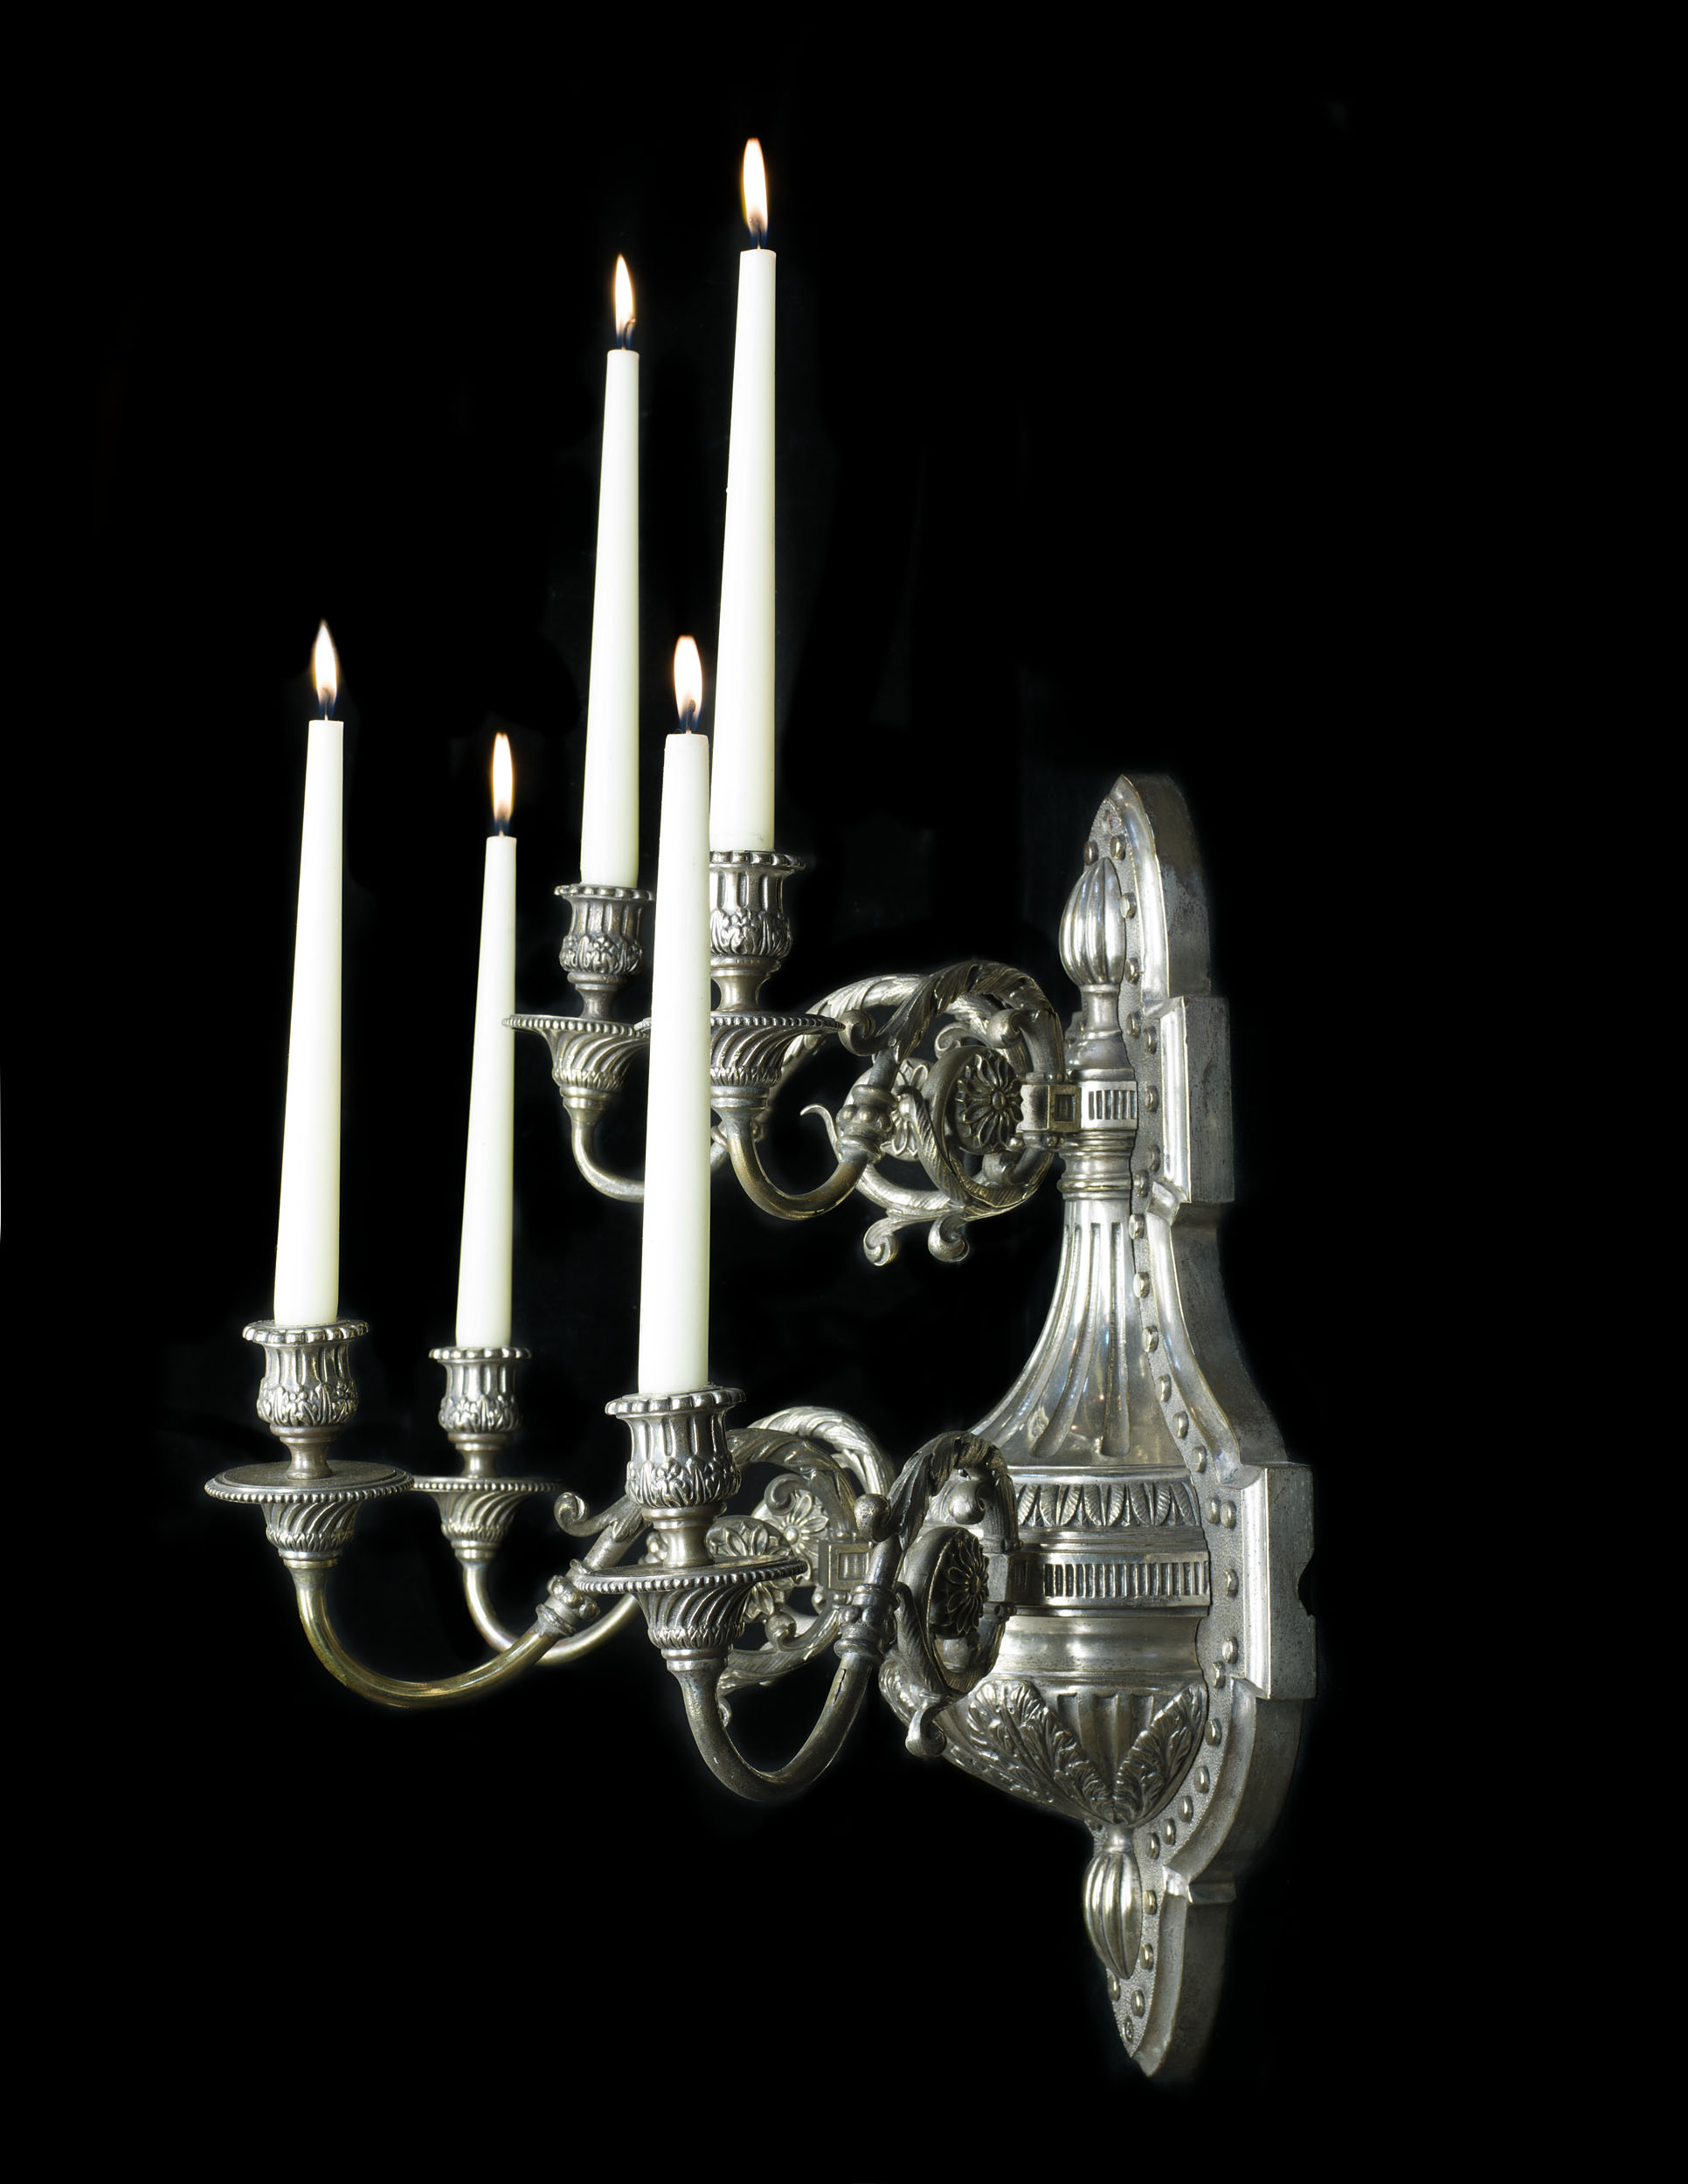 A Large Pair of Nickel Plated Wall Sconces